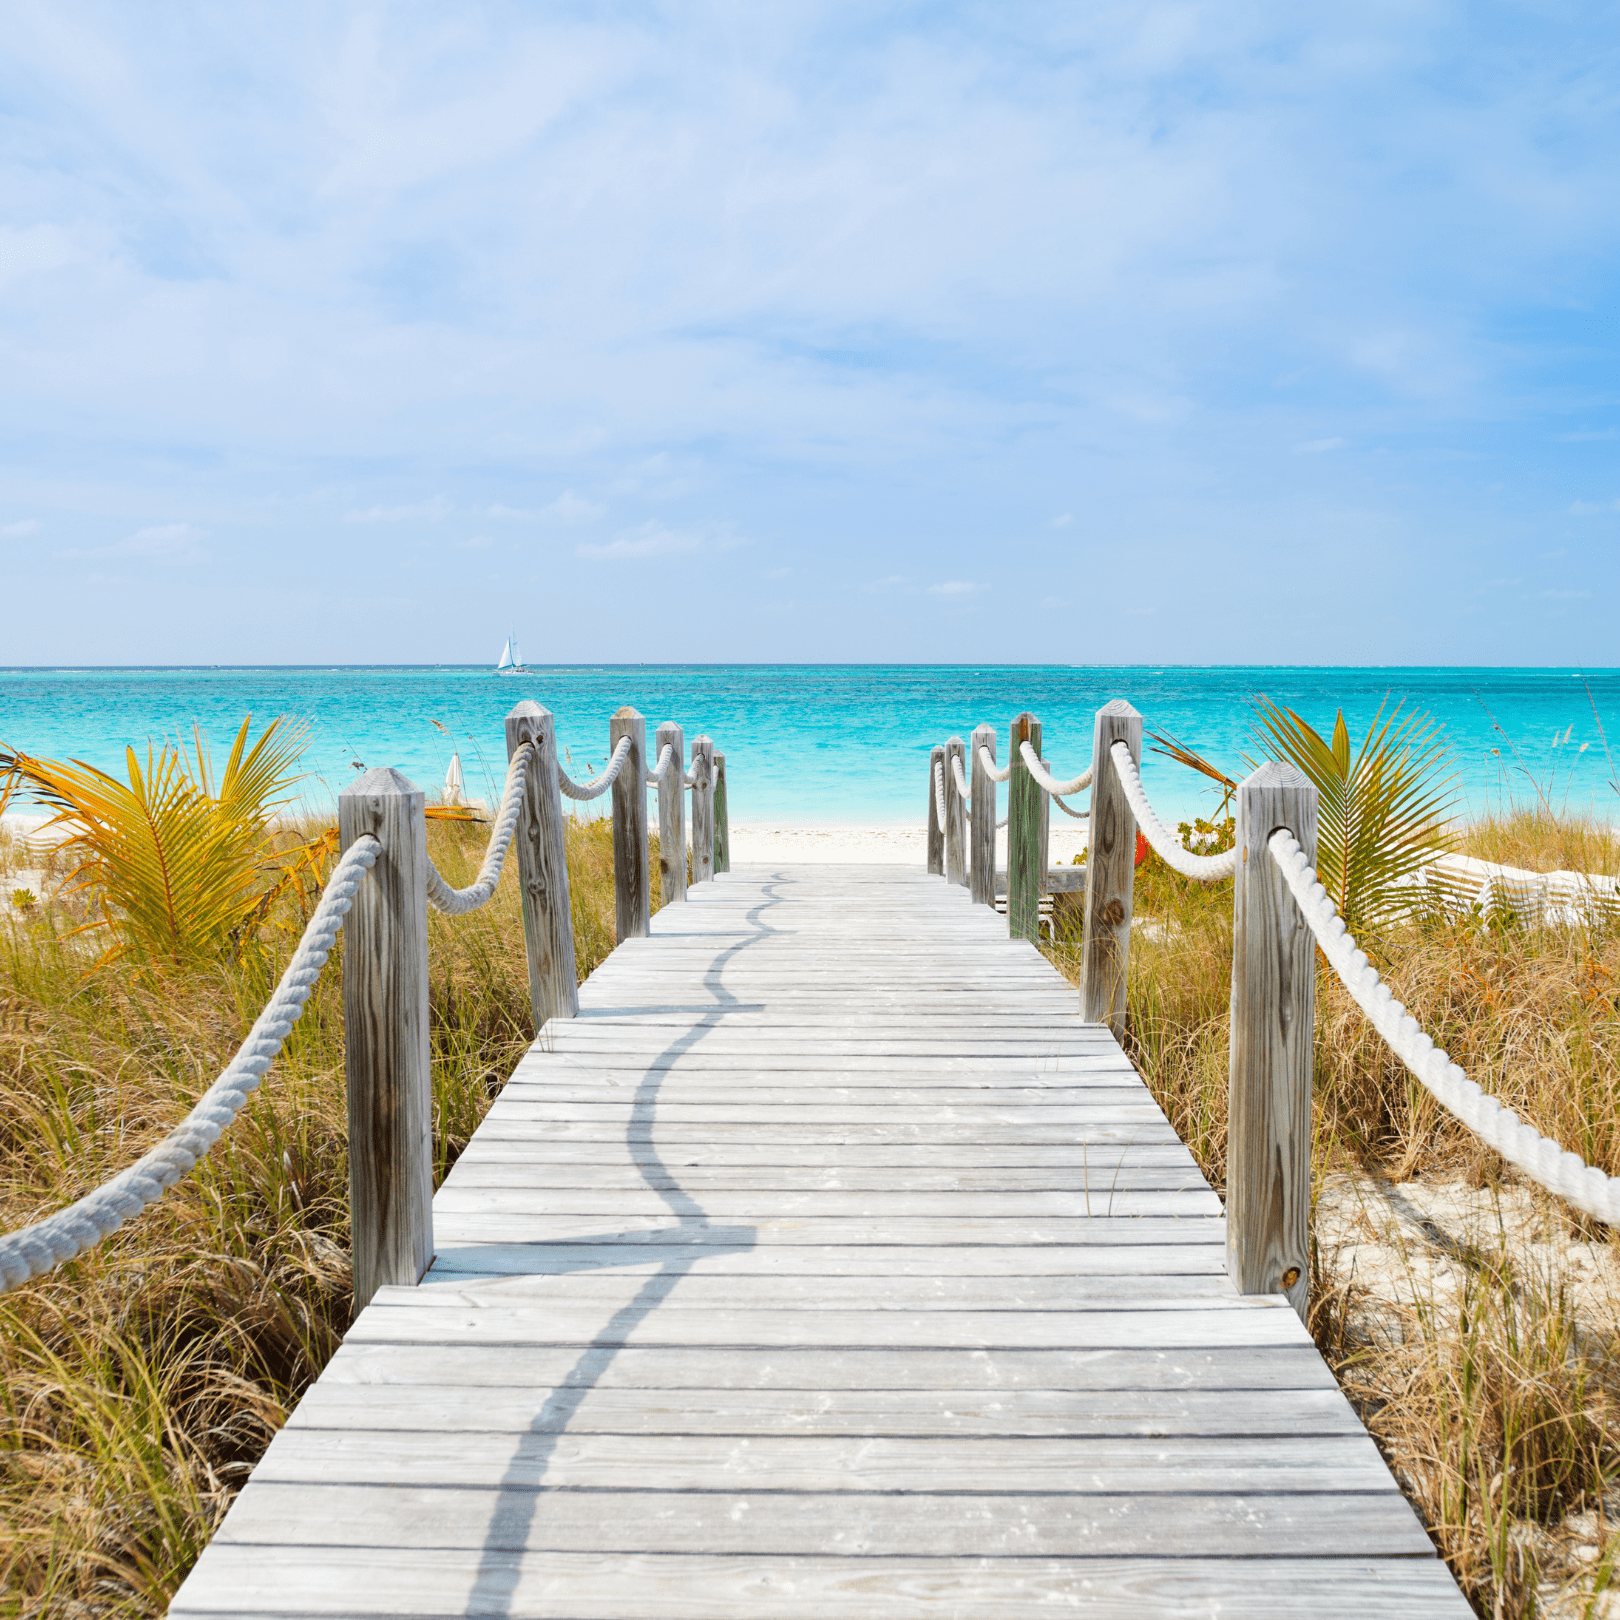 long wooden dock walkway lined with pillars with large rope as handrails leading to the beach near our Anna Maria island vacation rentals